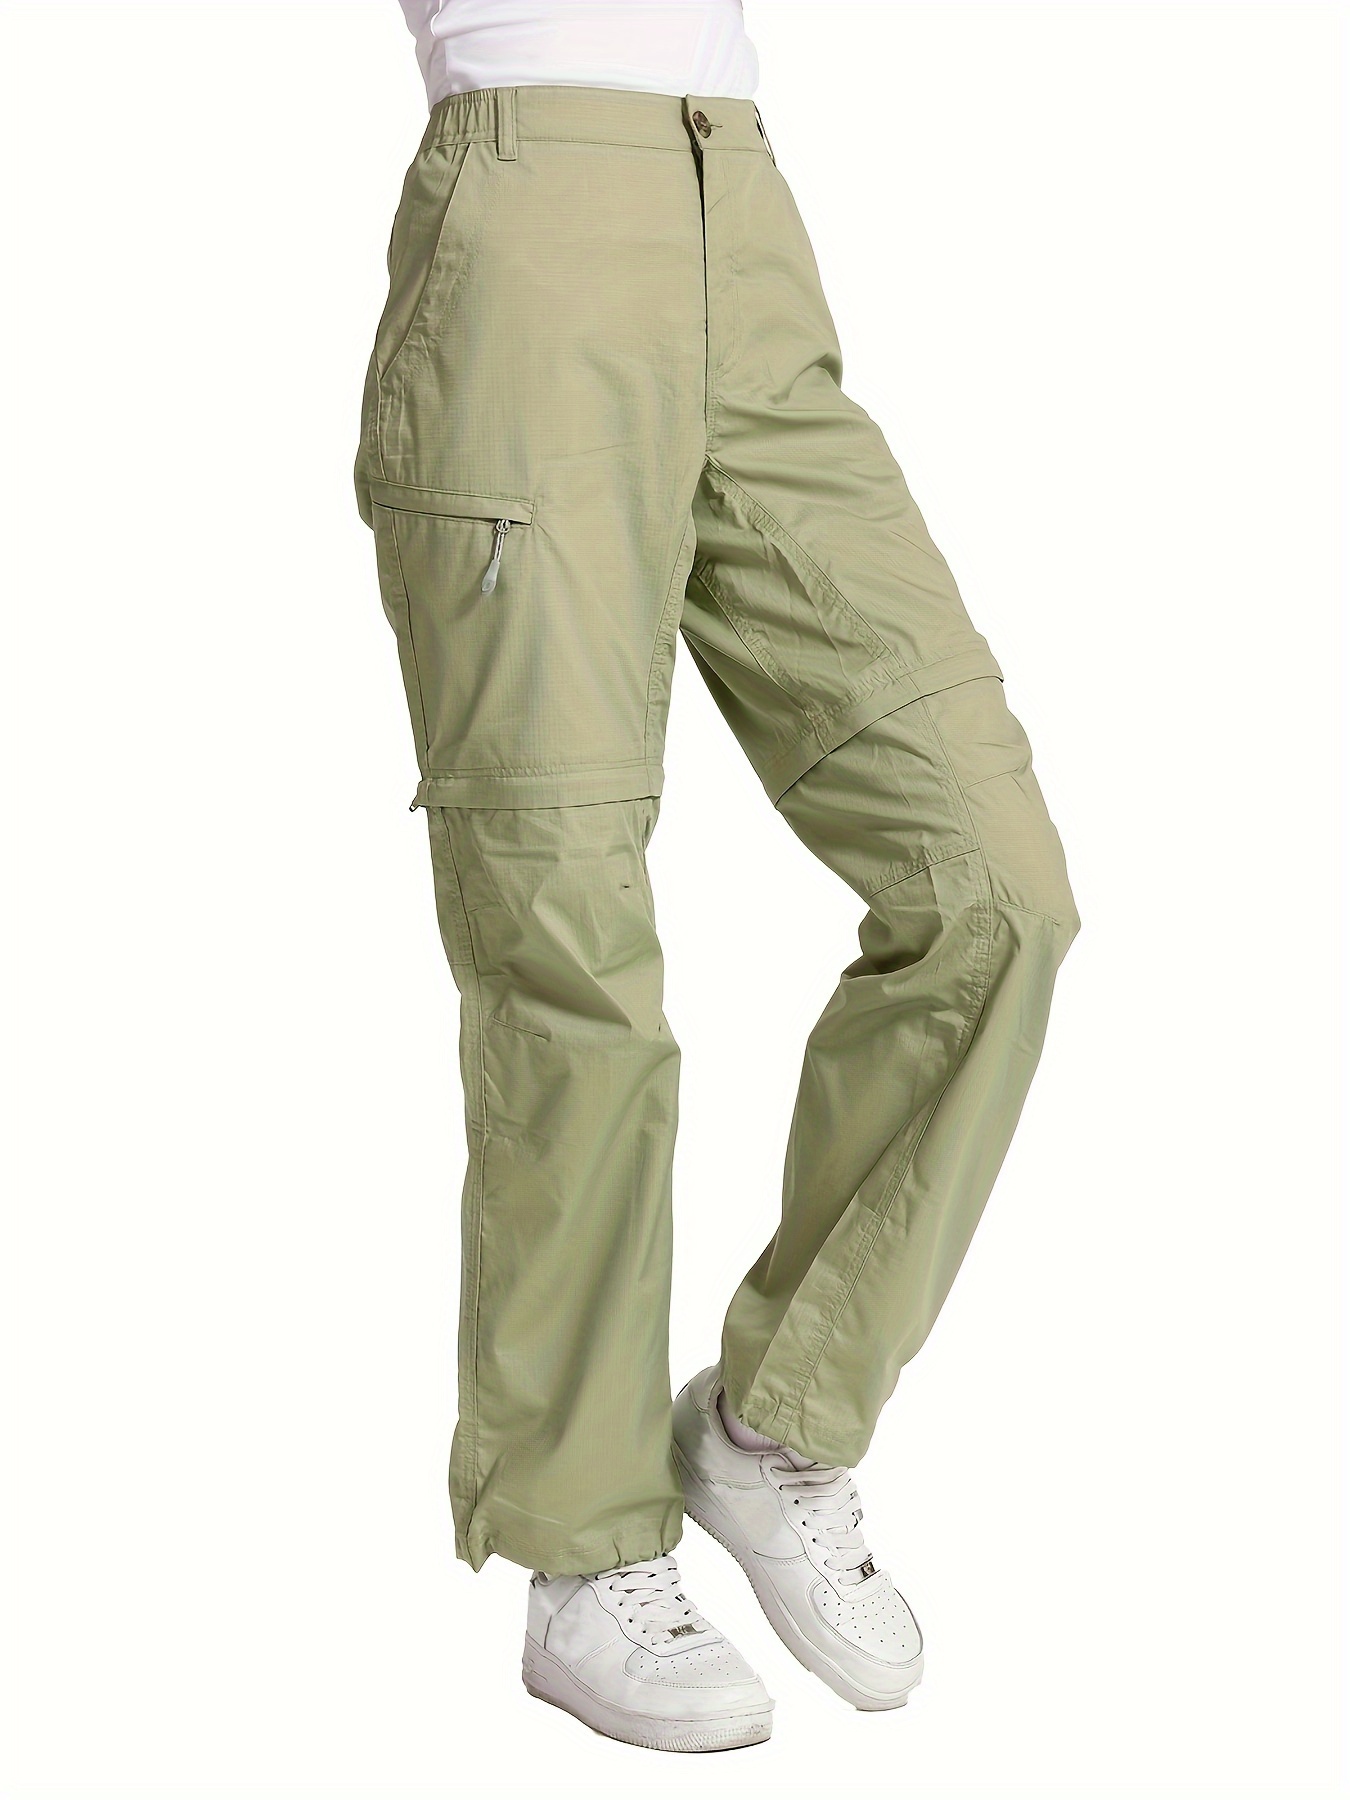 Womens Zip Off Convertible Trousers Multi Pockets Army Casual